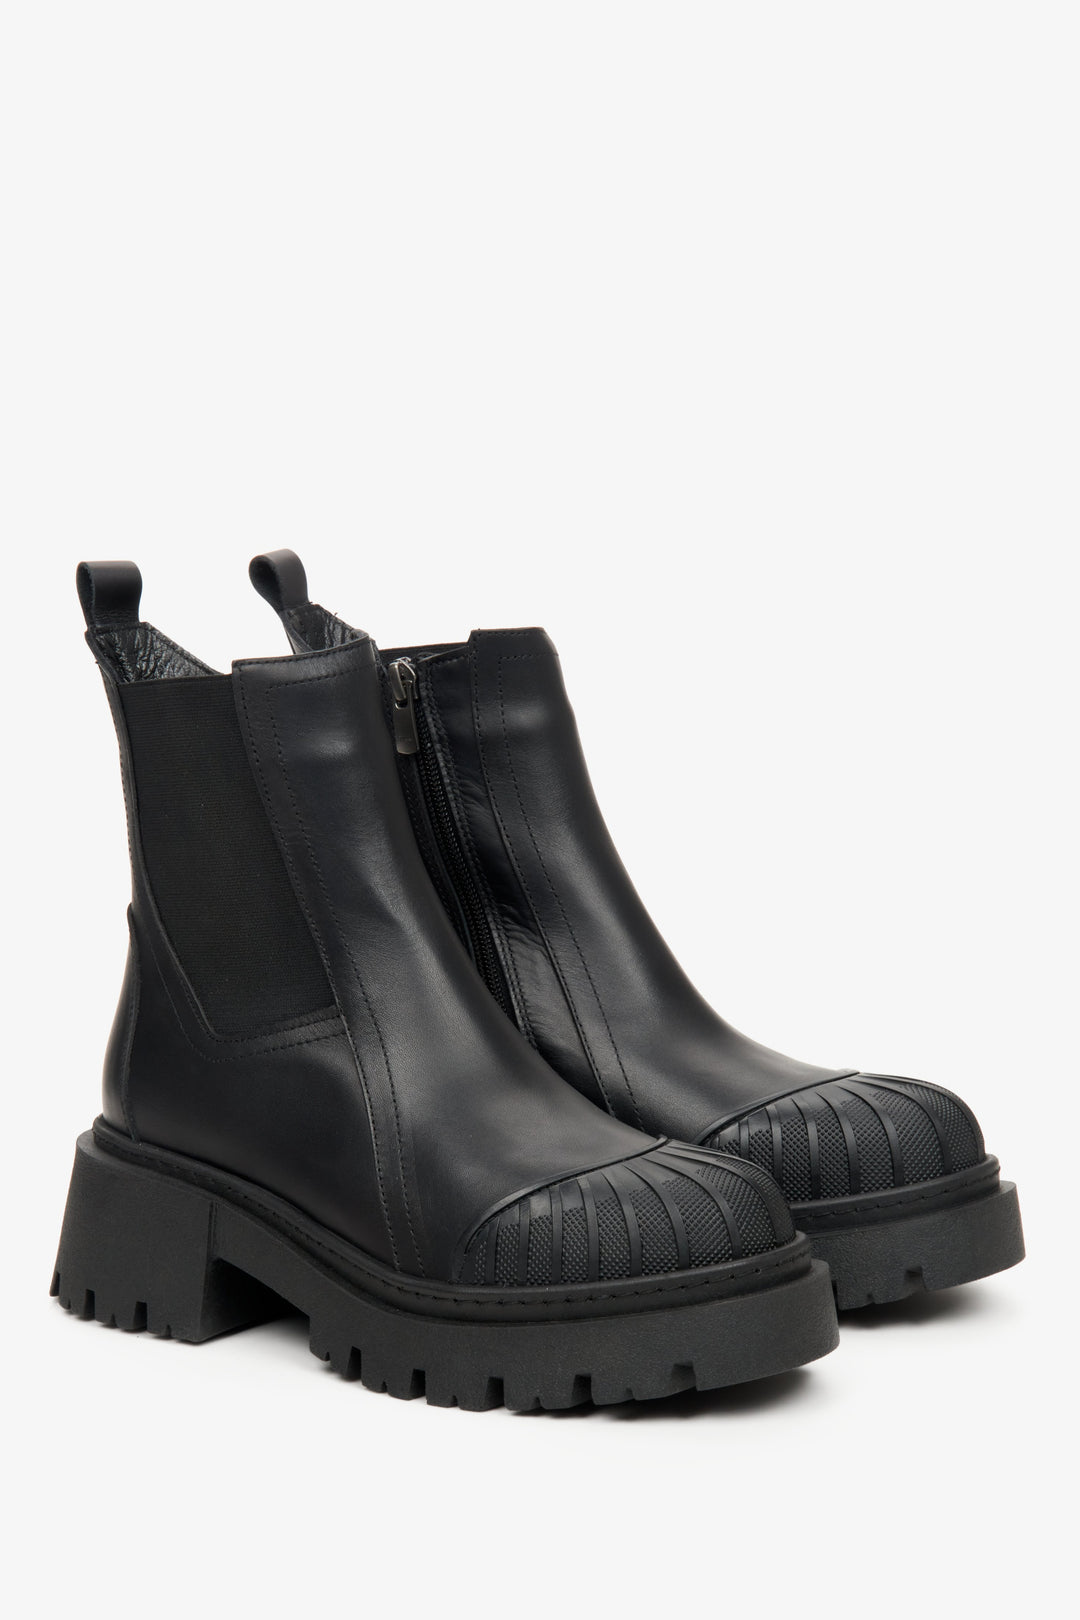 Leather women's winter ankle boots in black with a flexible sole by Estro.